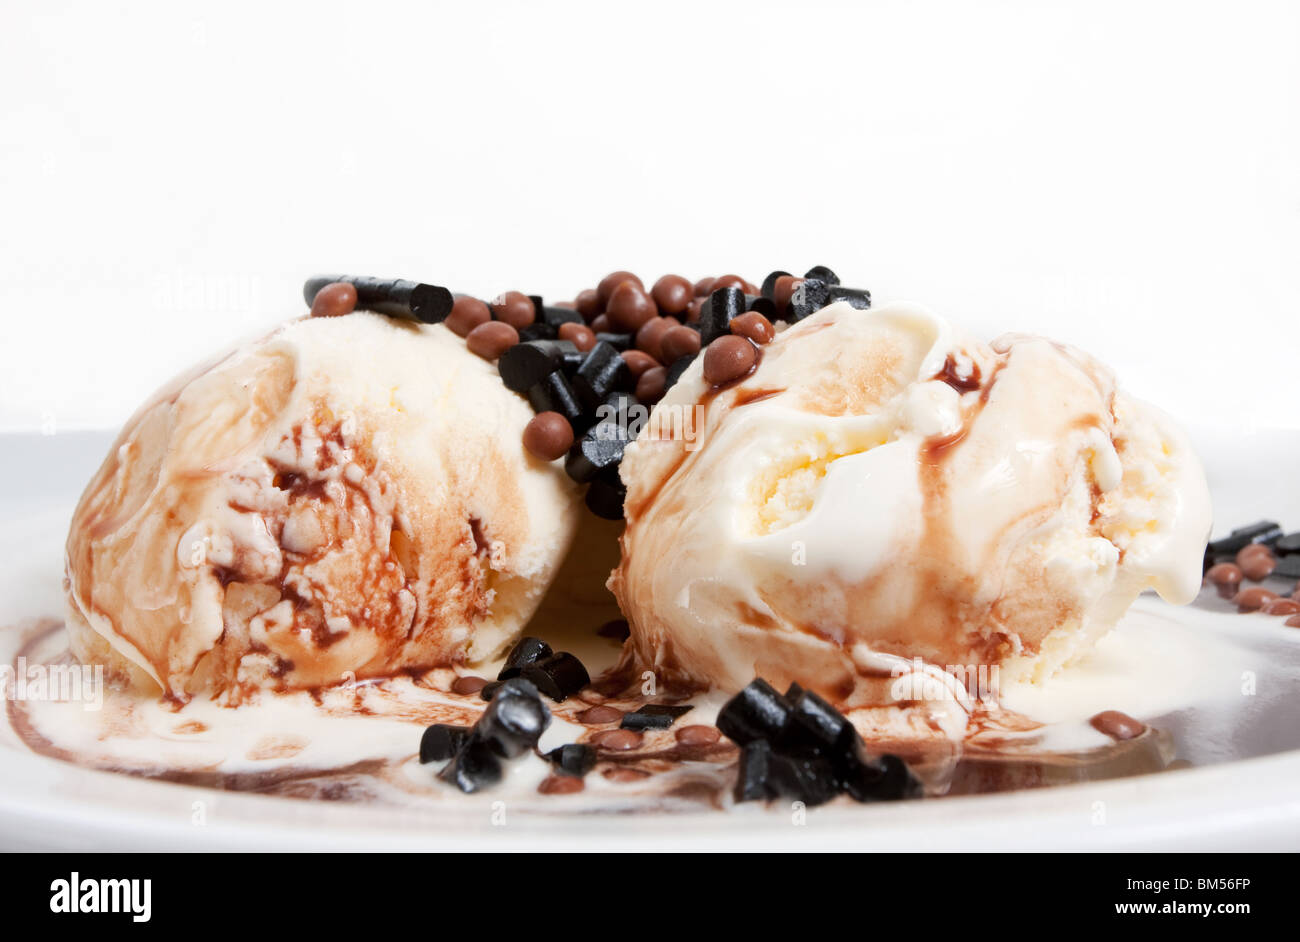 Vanilla icecream on a plate with chocolate sauce and candy topping Stock Photo